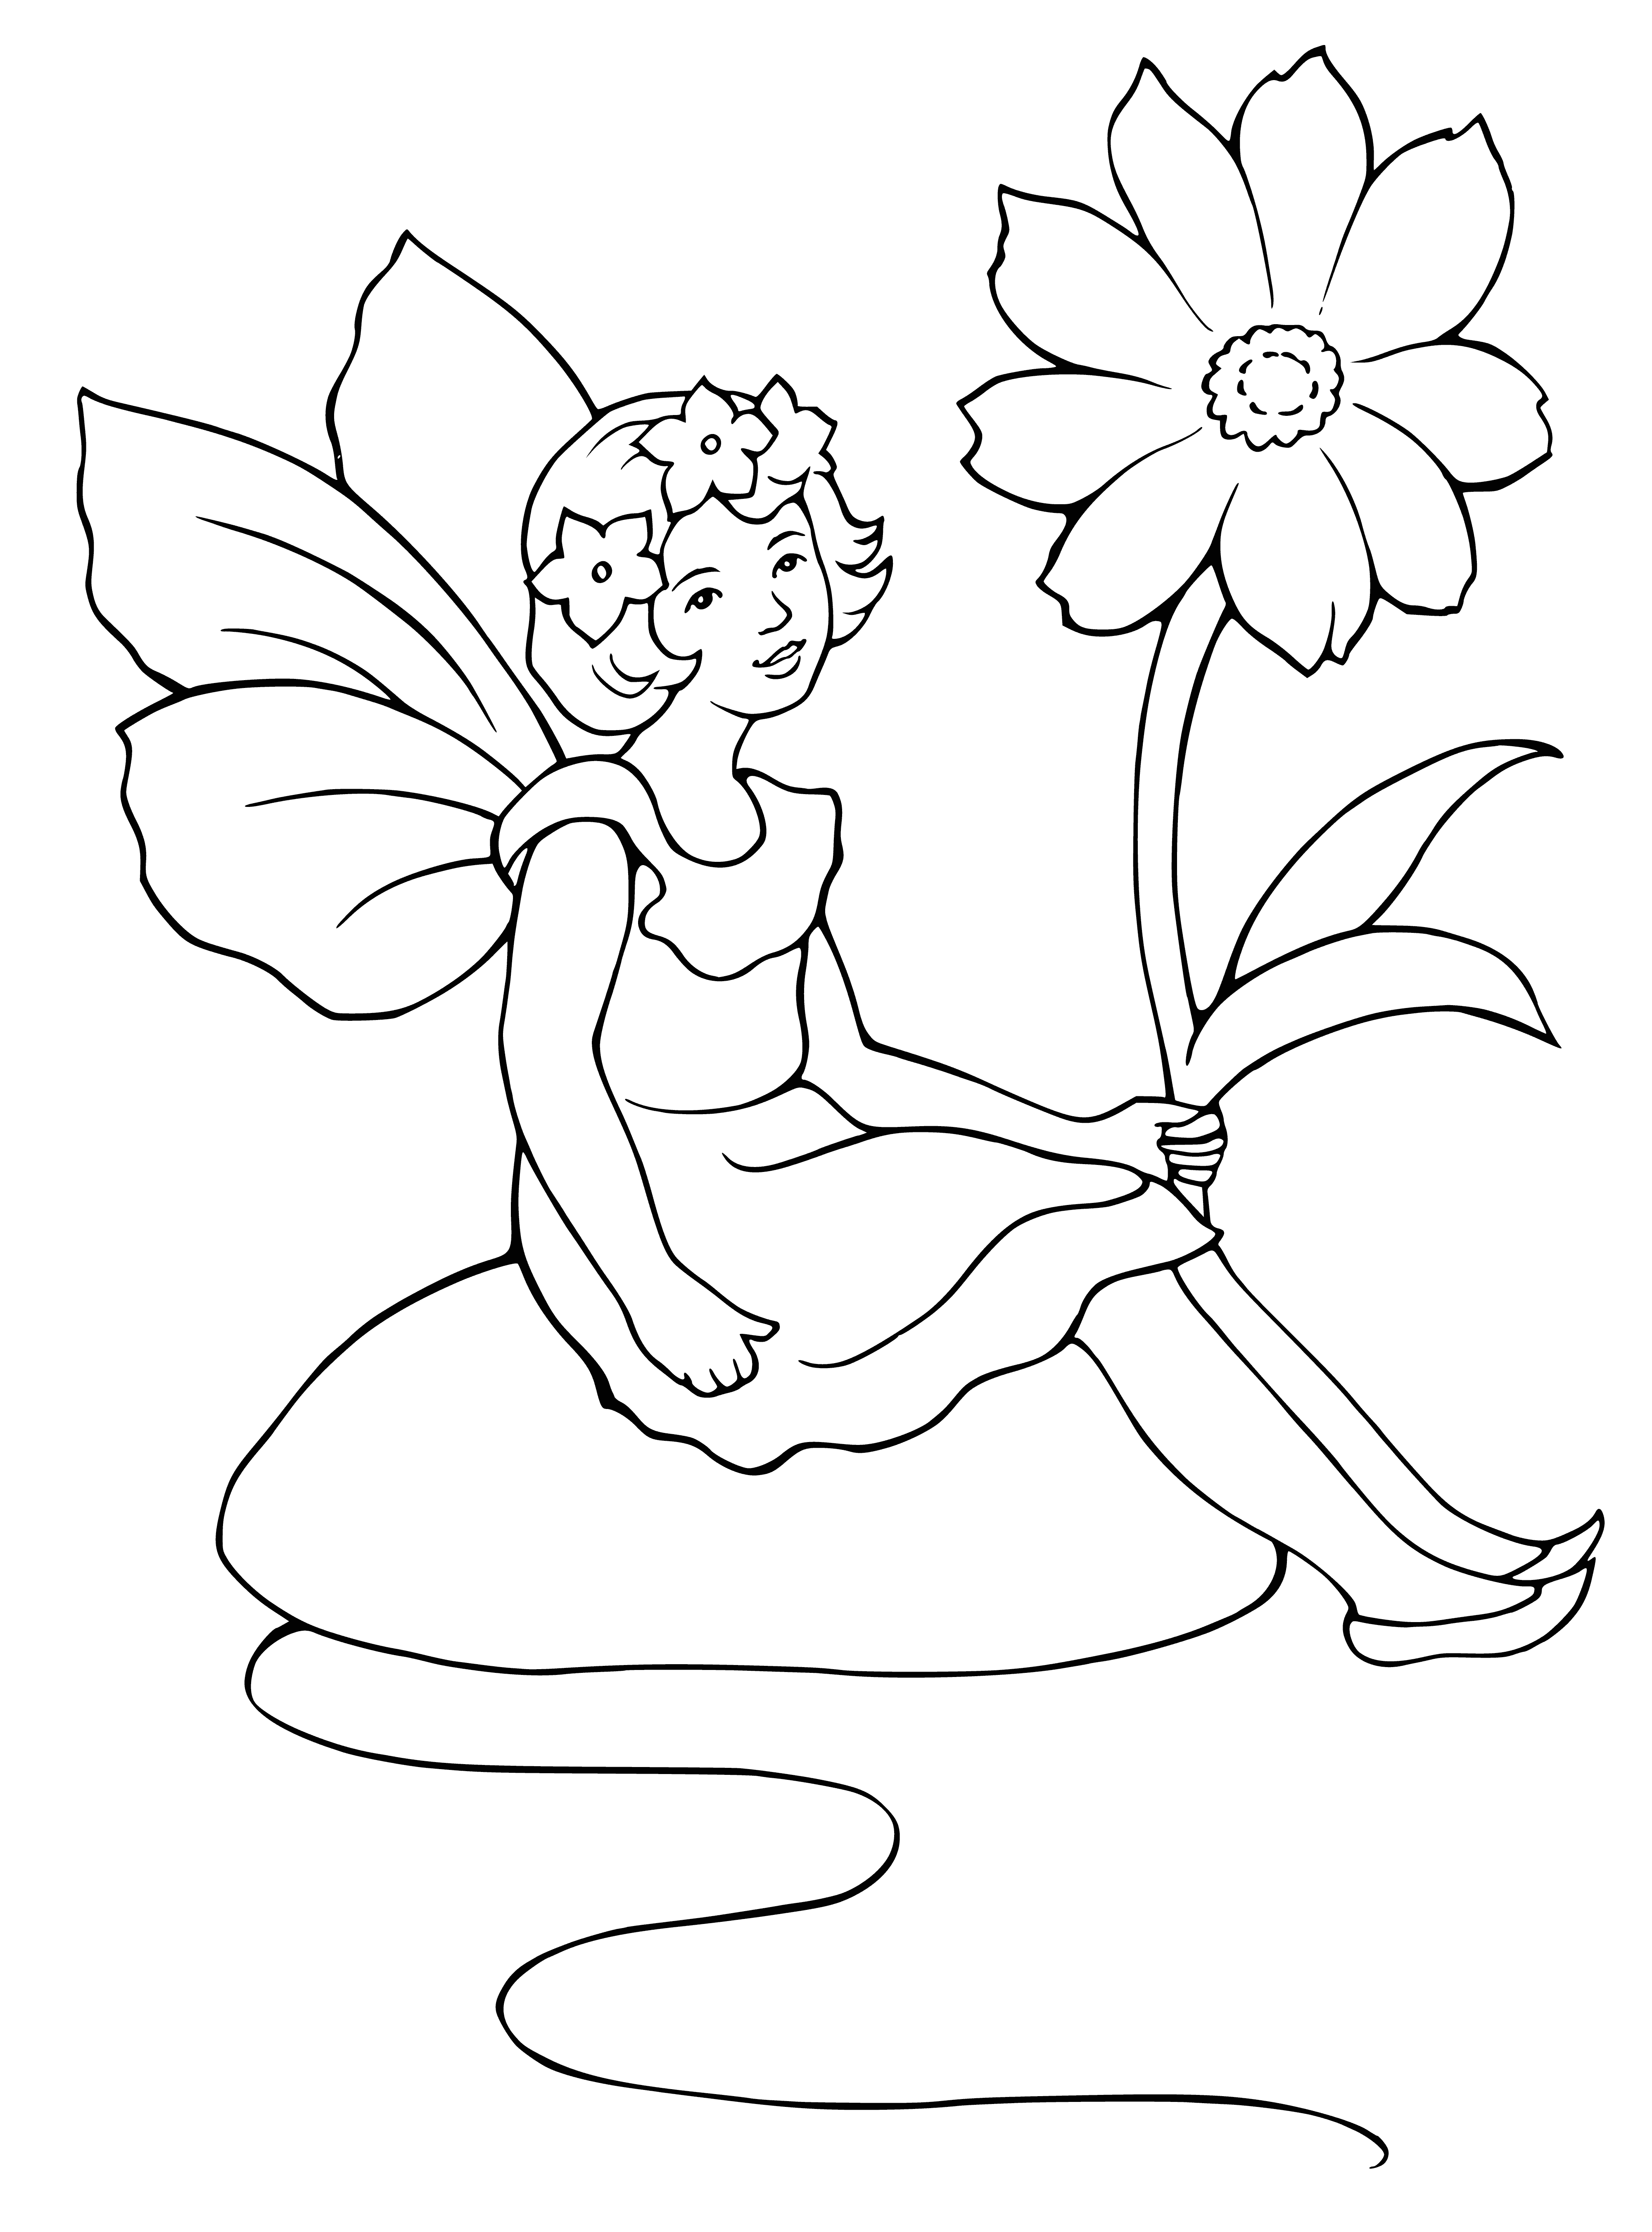 coloring page: Fairy with delicate wings sits among wildflowers in a field, near a wood with tall trees reaching up to the sky.